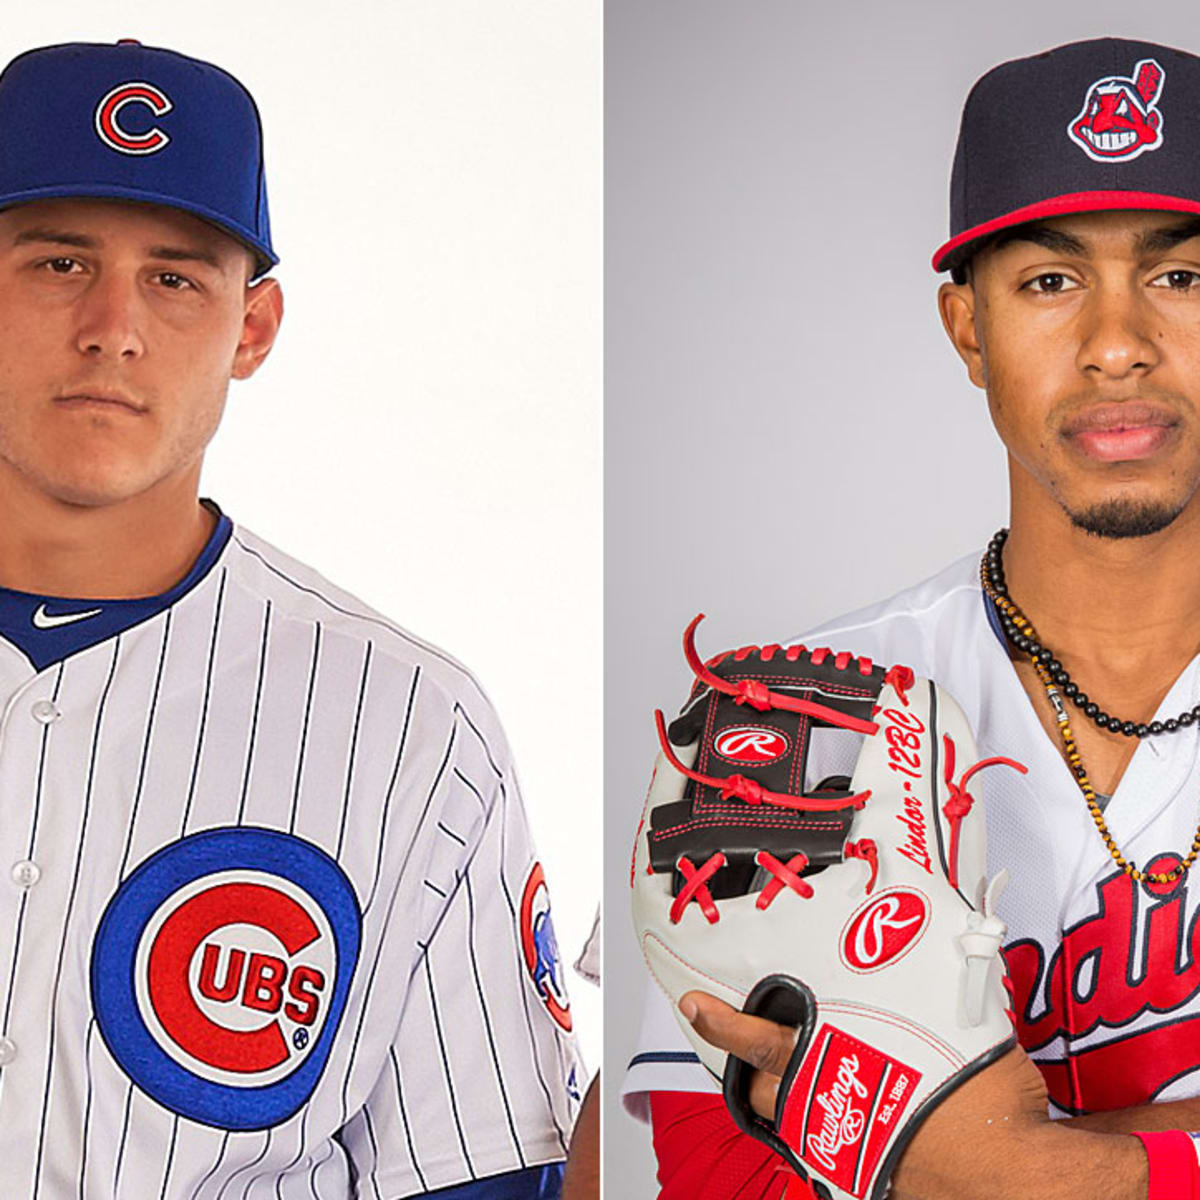 World Series 2016 picks: Cubs or Indians? SN experts make their